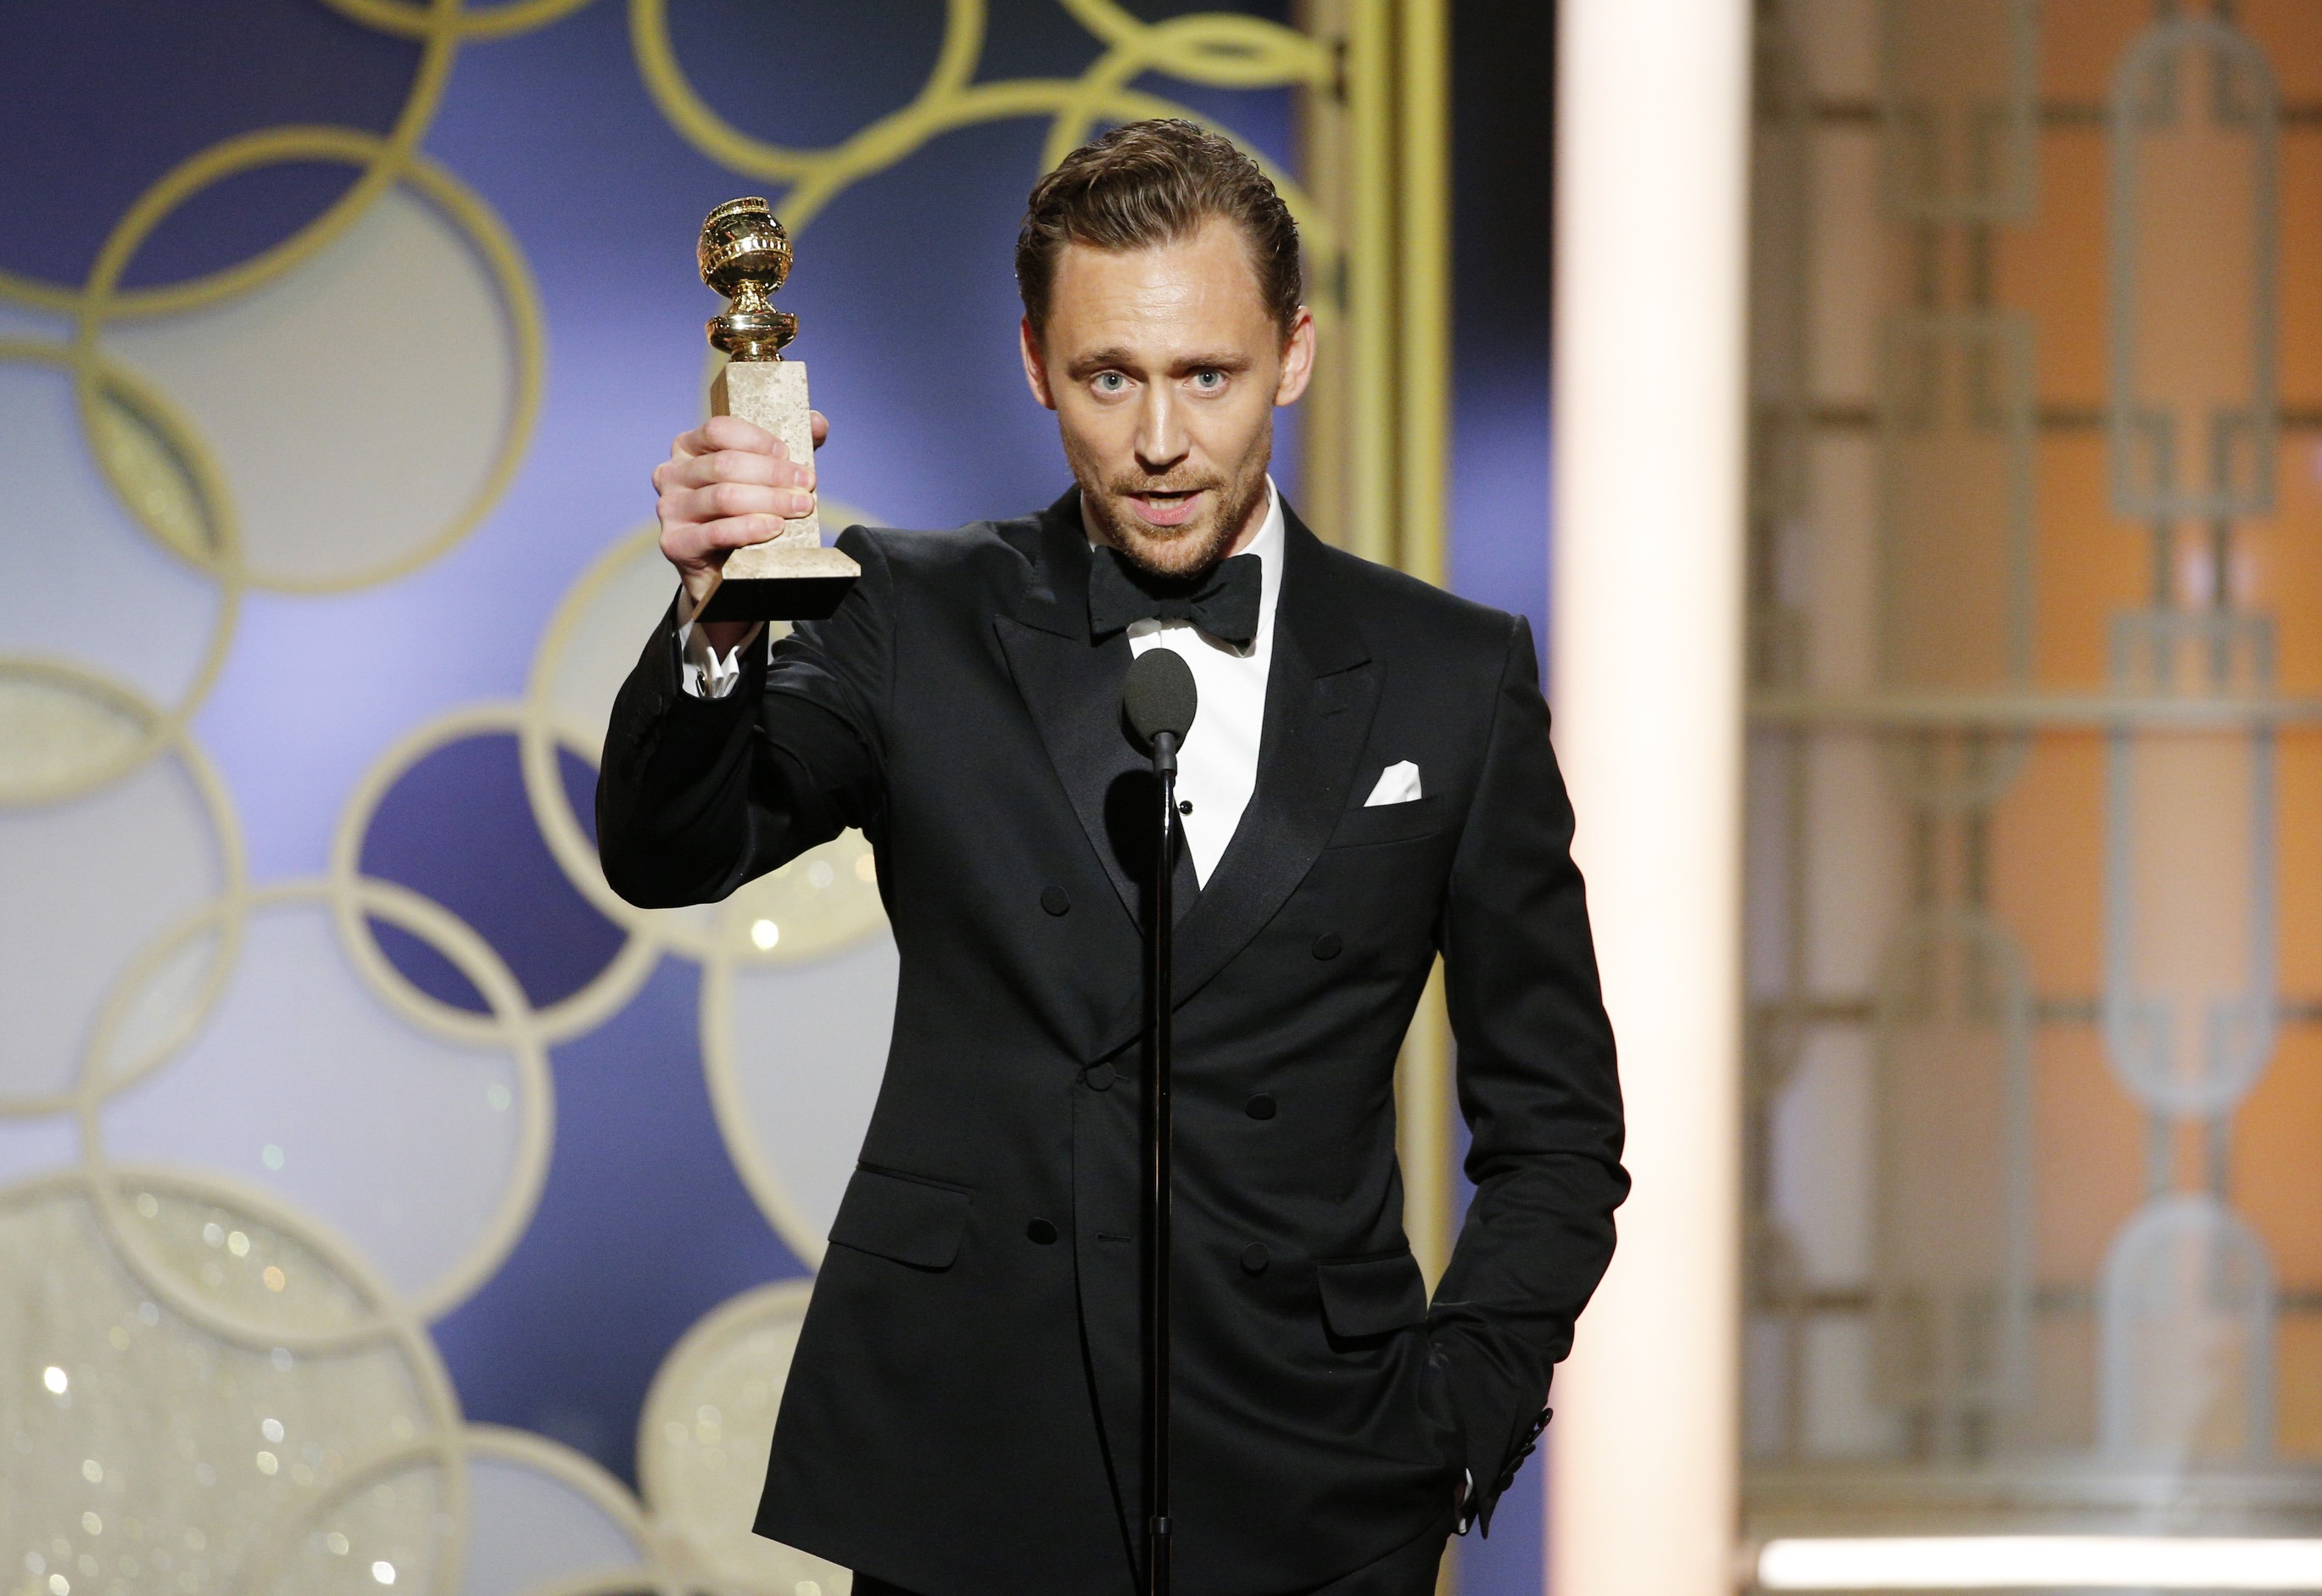 Tom Hiddleston accepts the award for Best Actor - Limited Series or Motion Picture for TV for his role in "The Night Manager" onstage during the 74th Annual Golden Globe Awards at The Beverly Hilton Hotel, Jan. 8, 2017 in Beverly Hills. (NBC/Getty Images)